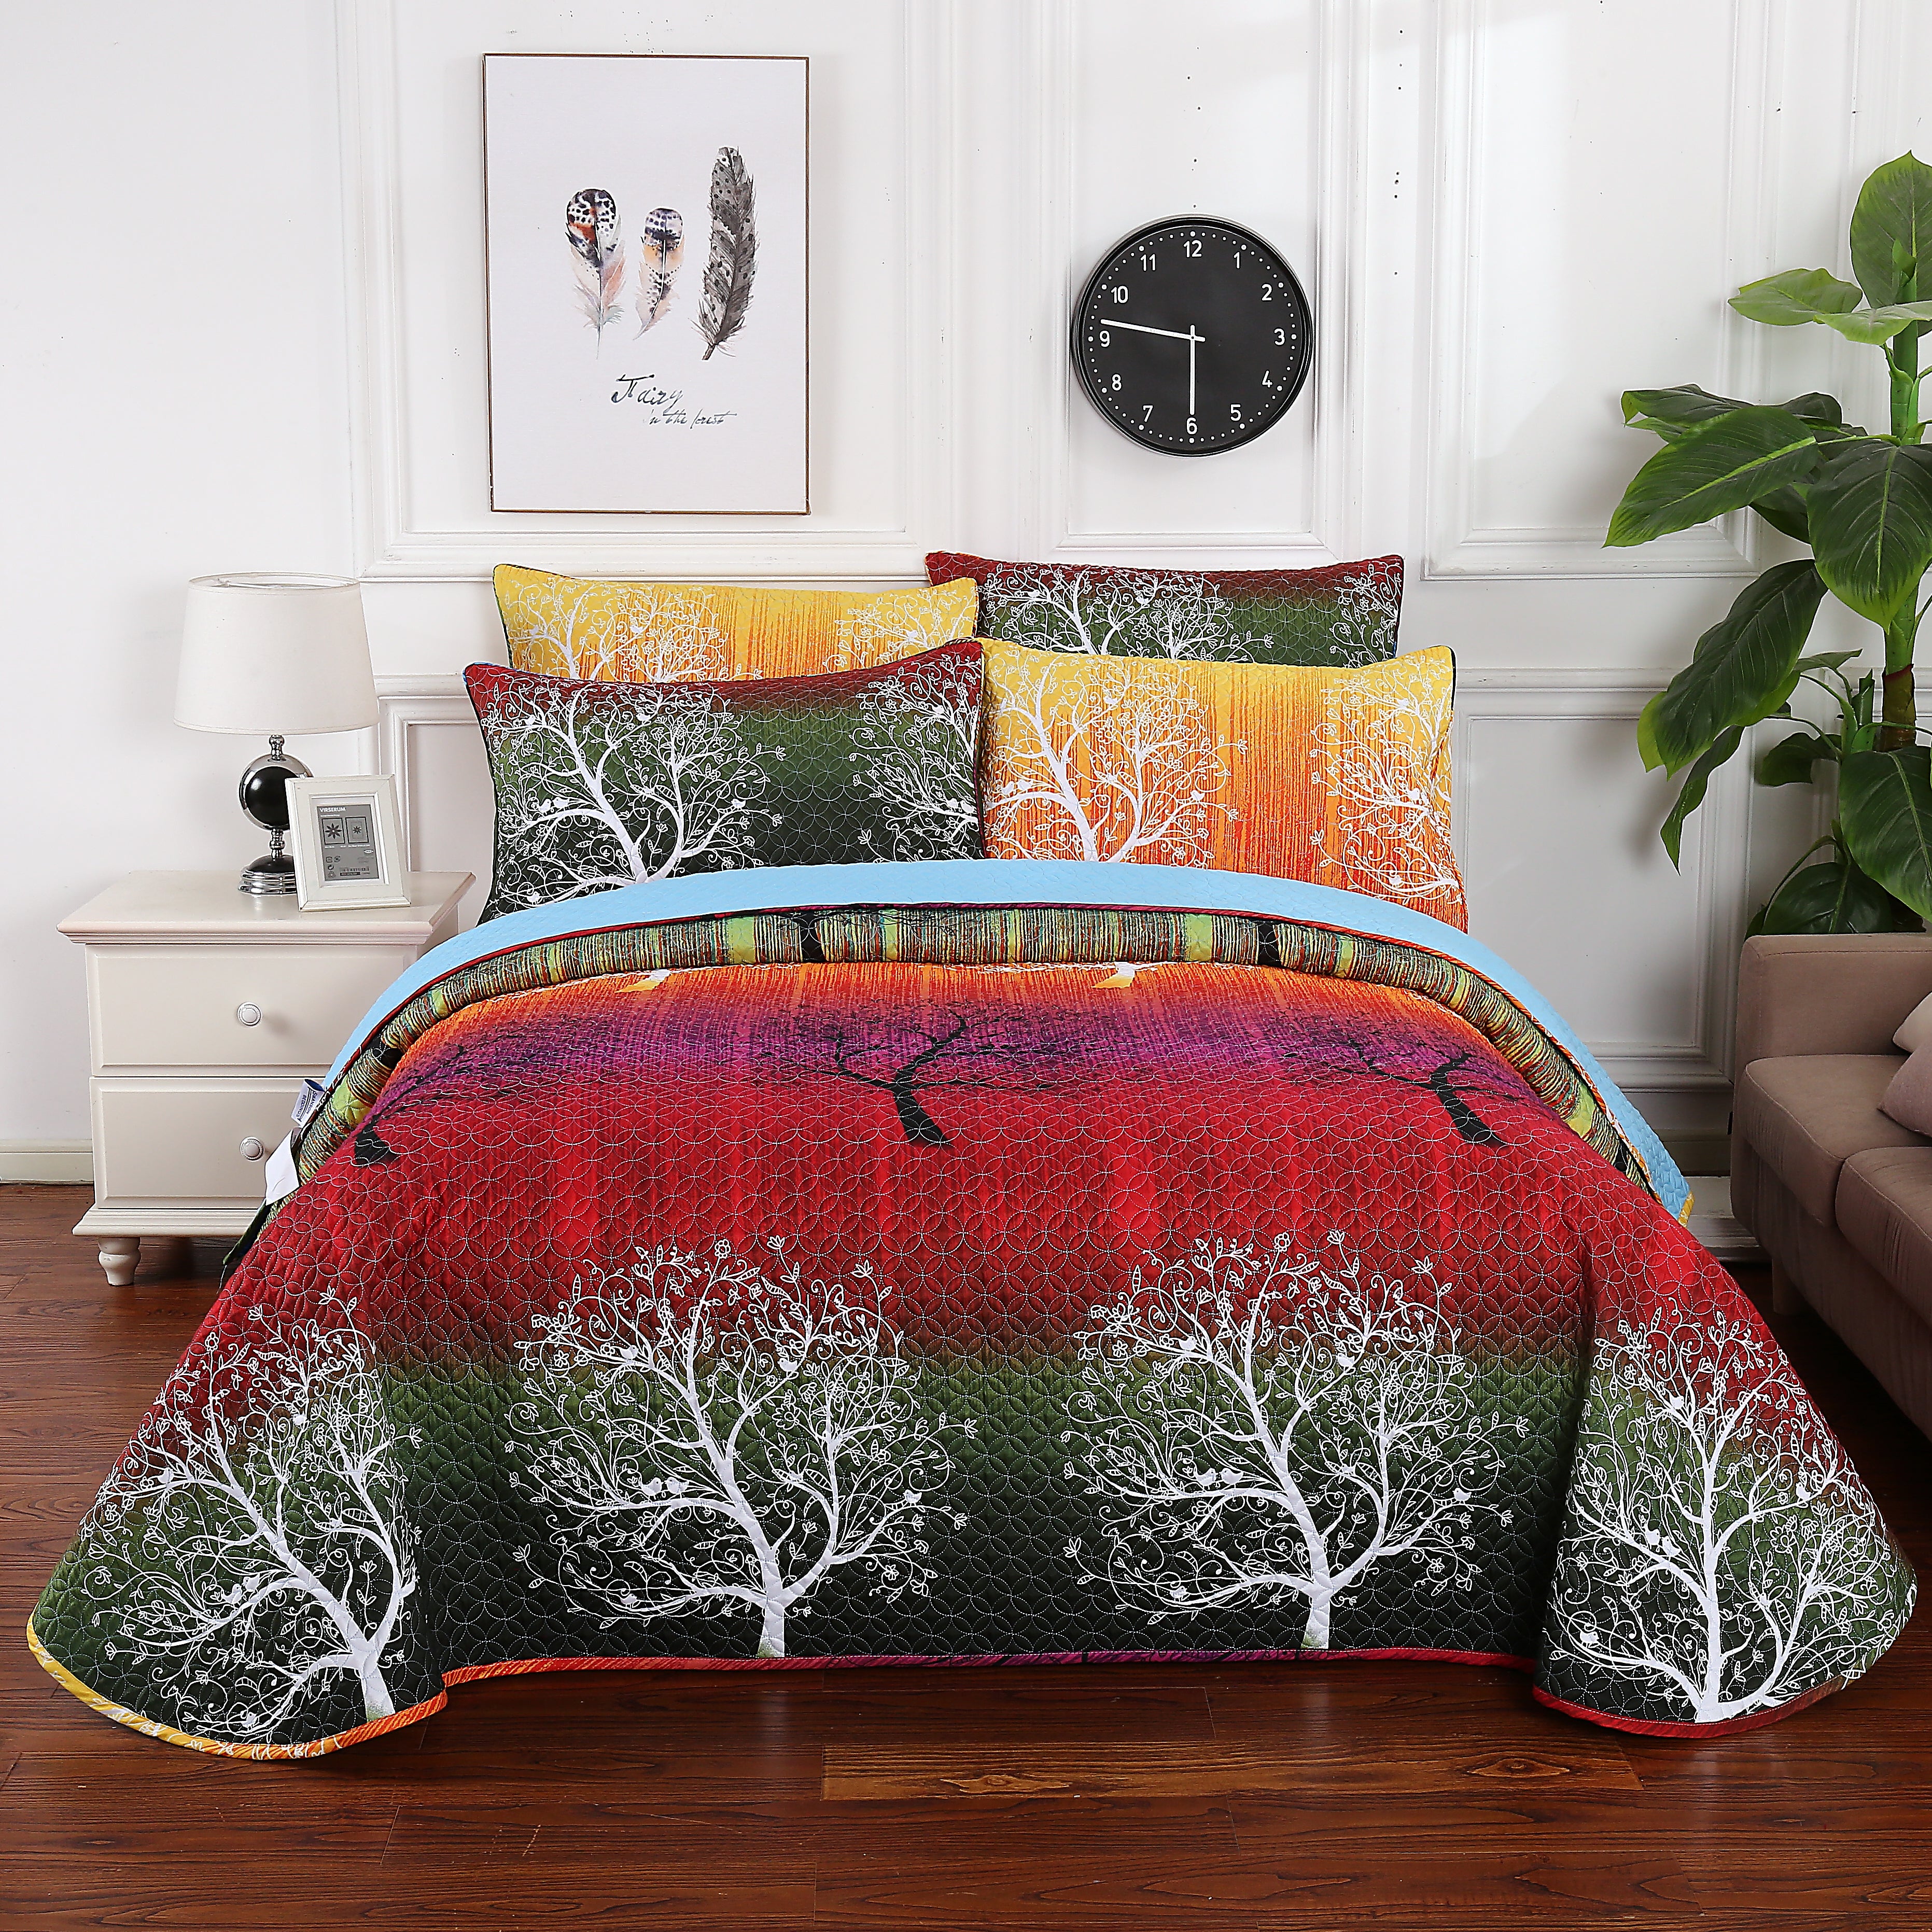 Rainbow Tree Bedspread Coverlet Quilt Set: Quilt and Pillow Sham(s)